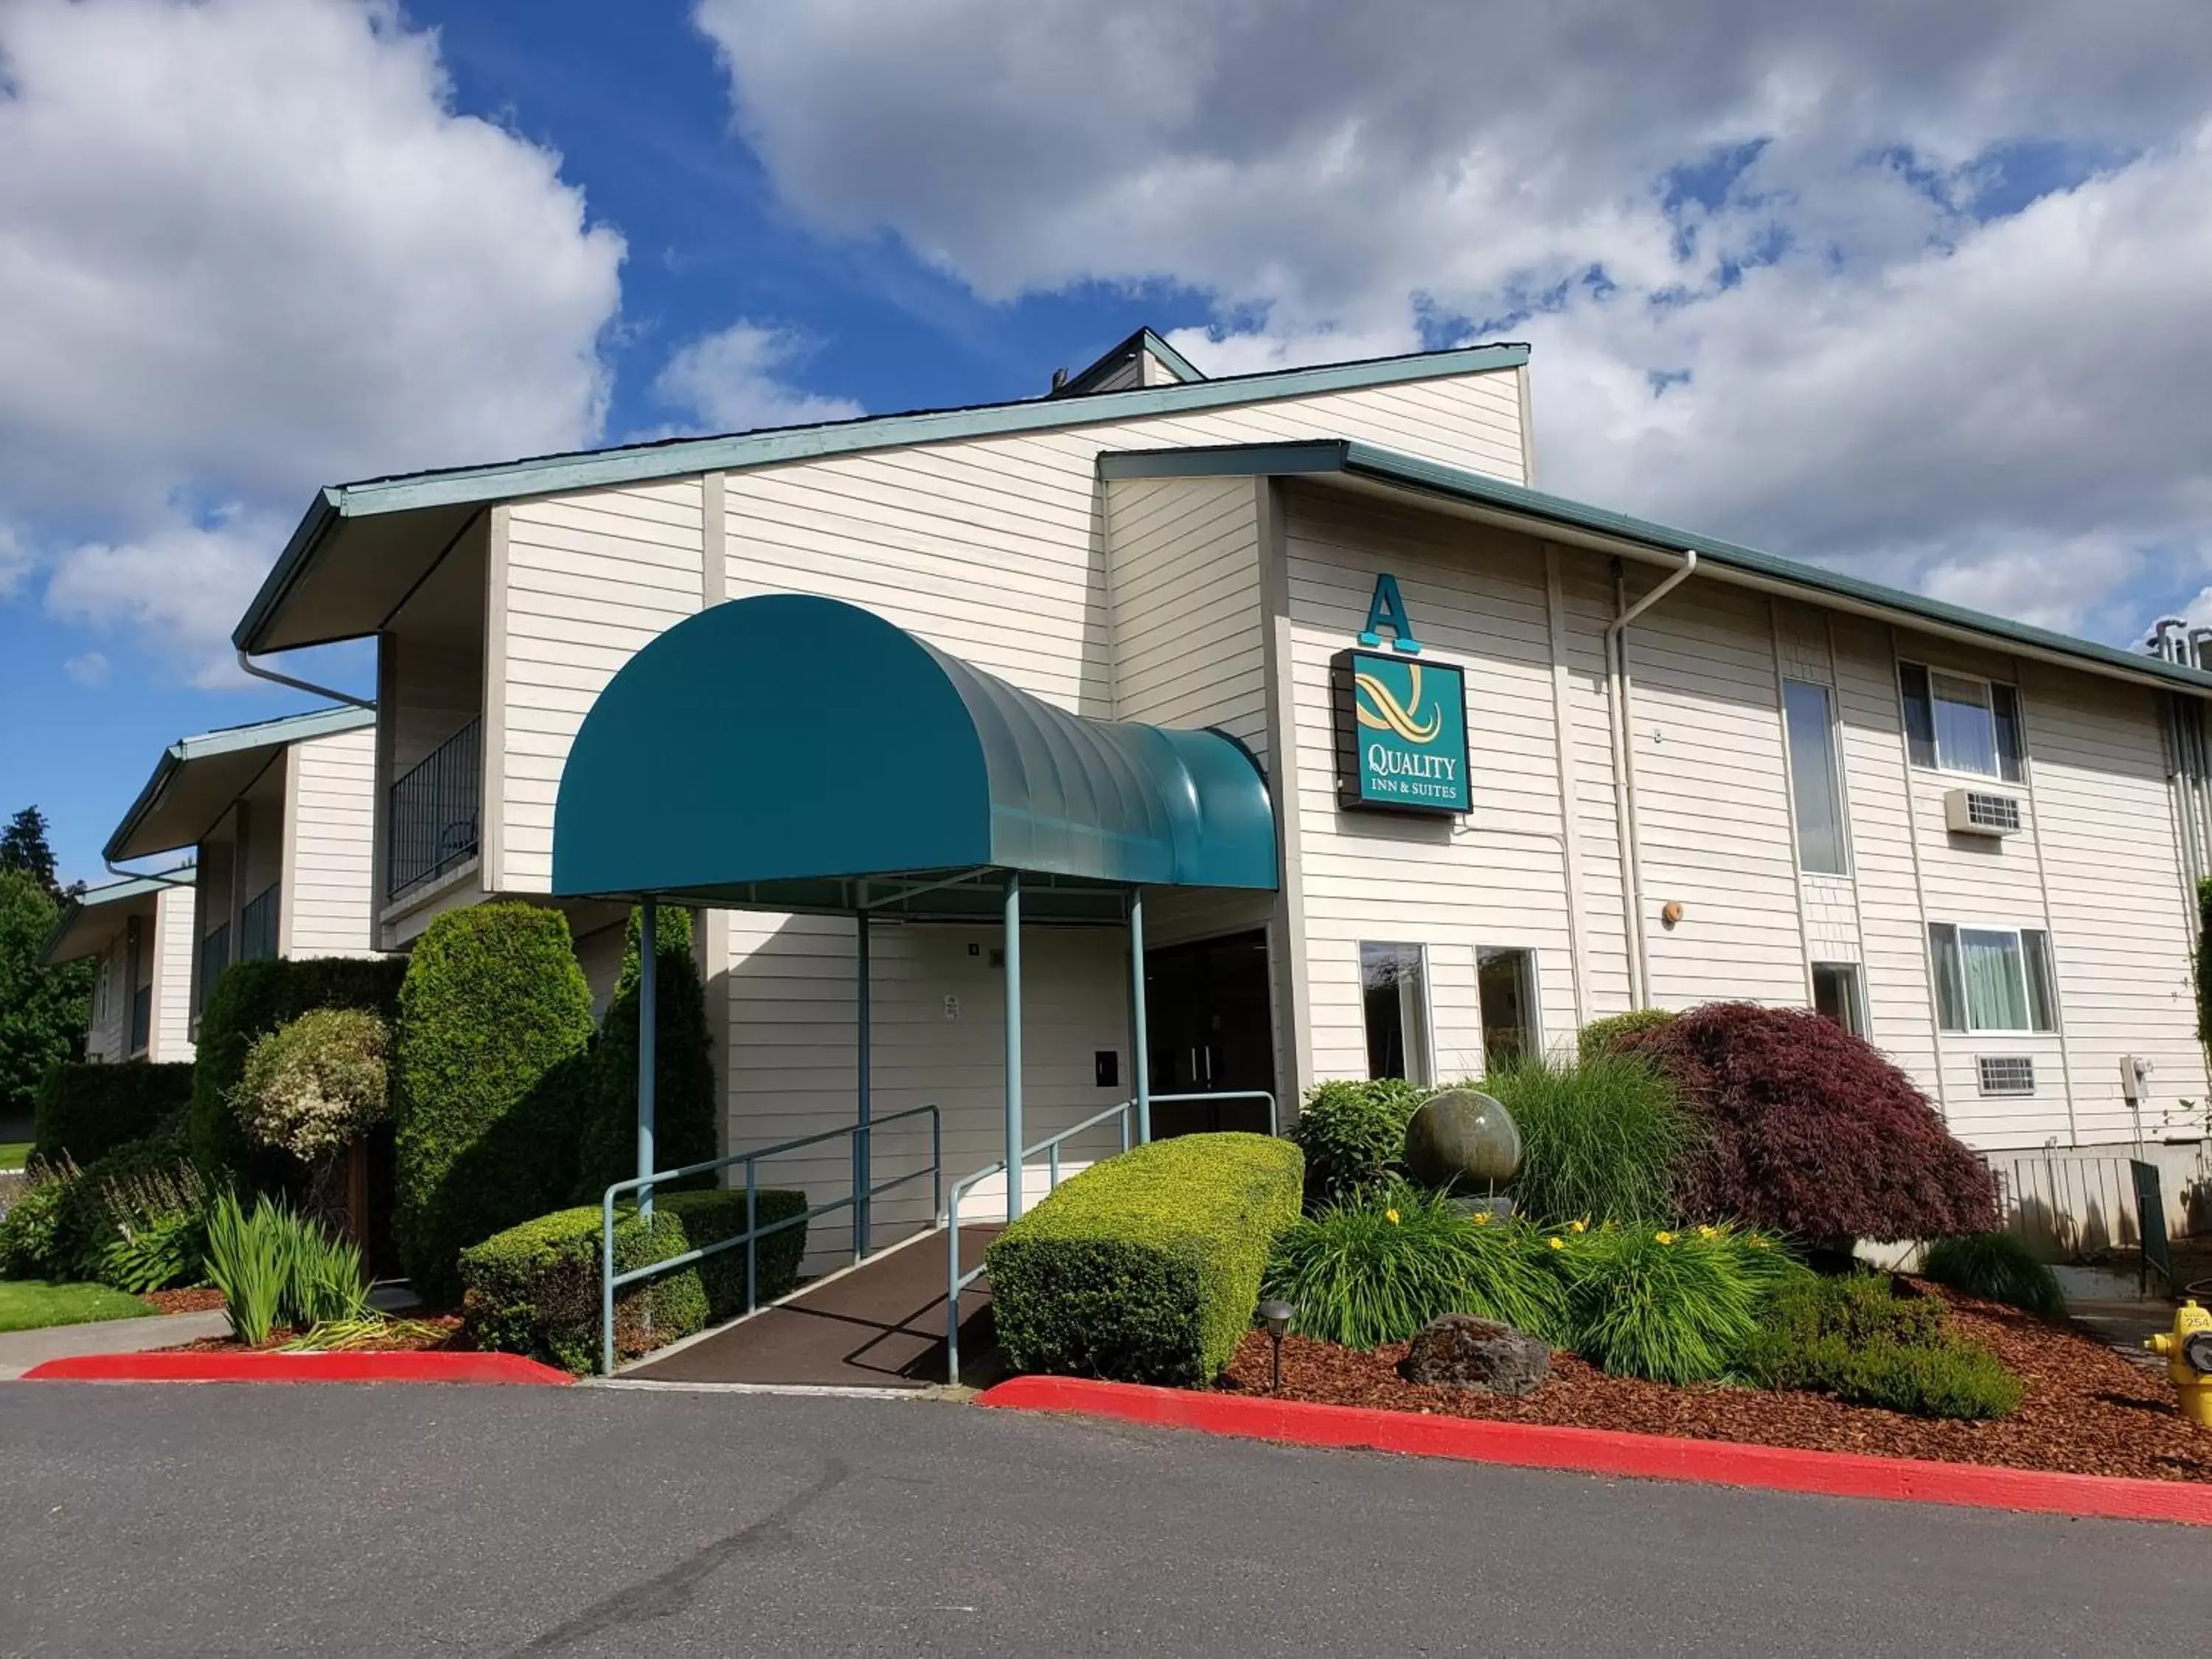 Property Building in Quality Inn & Suites Vancouver